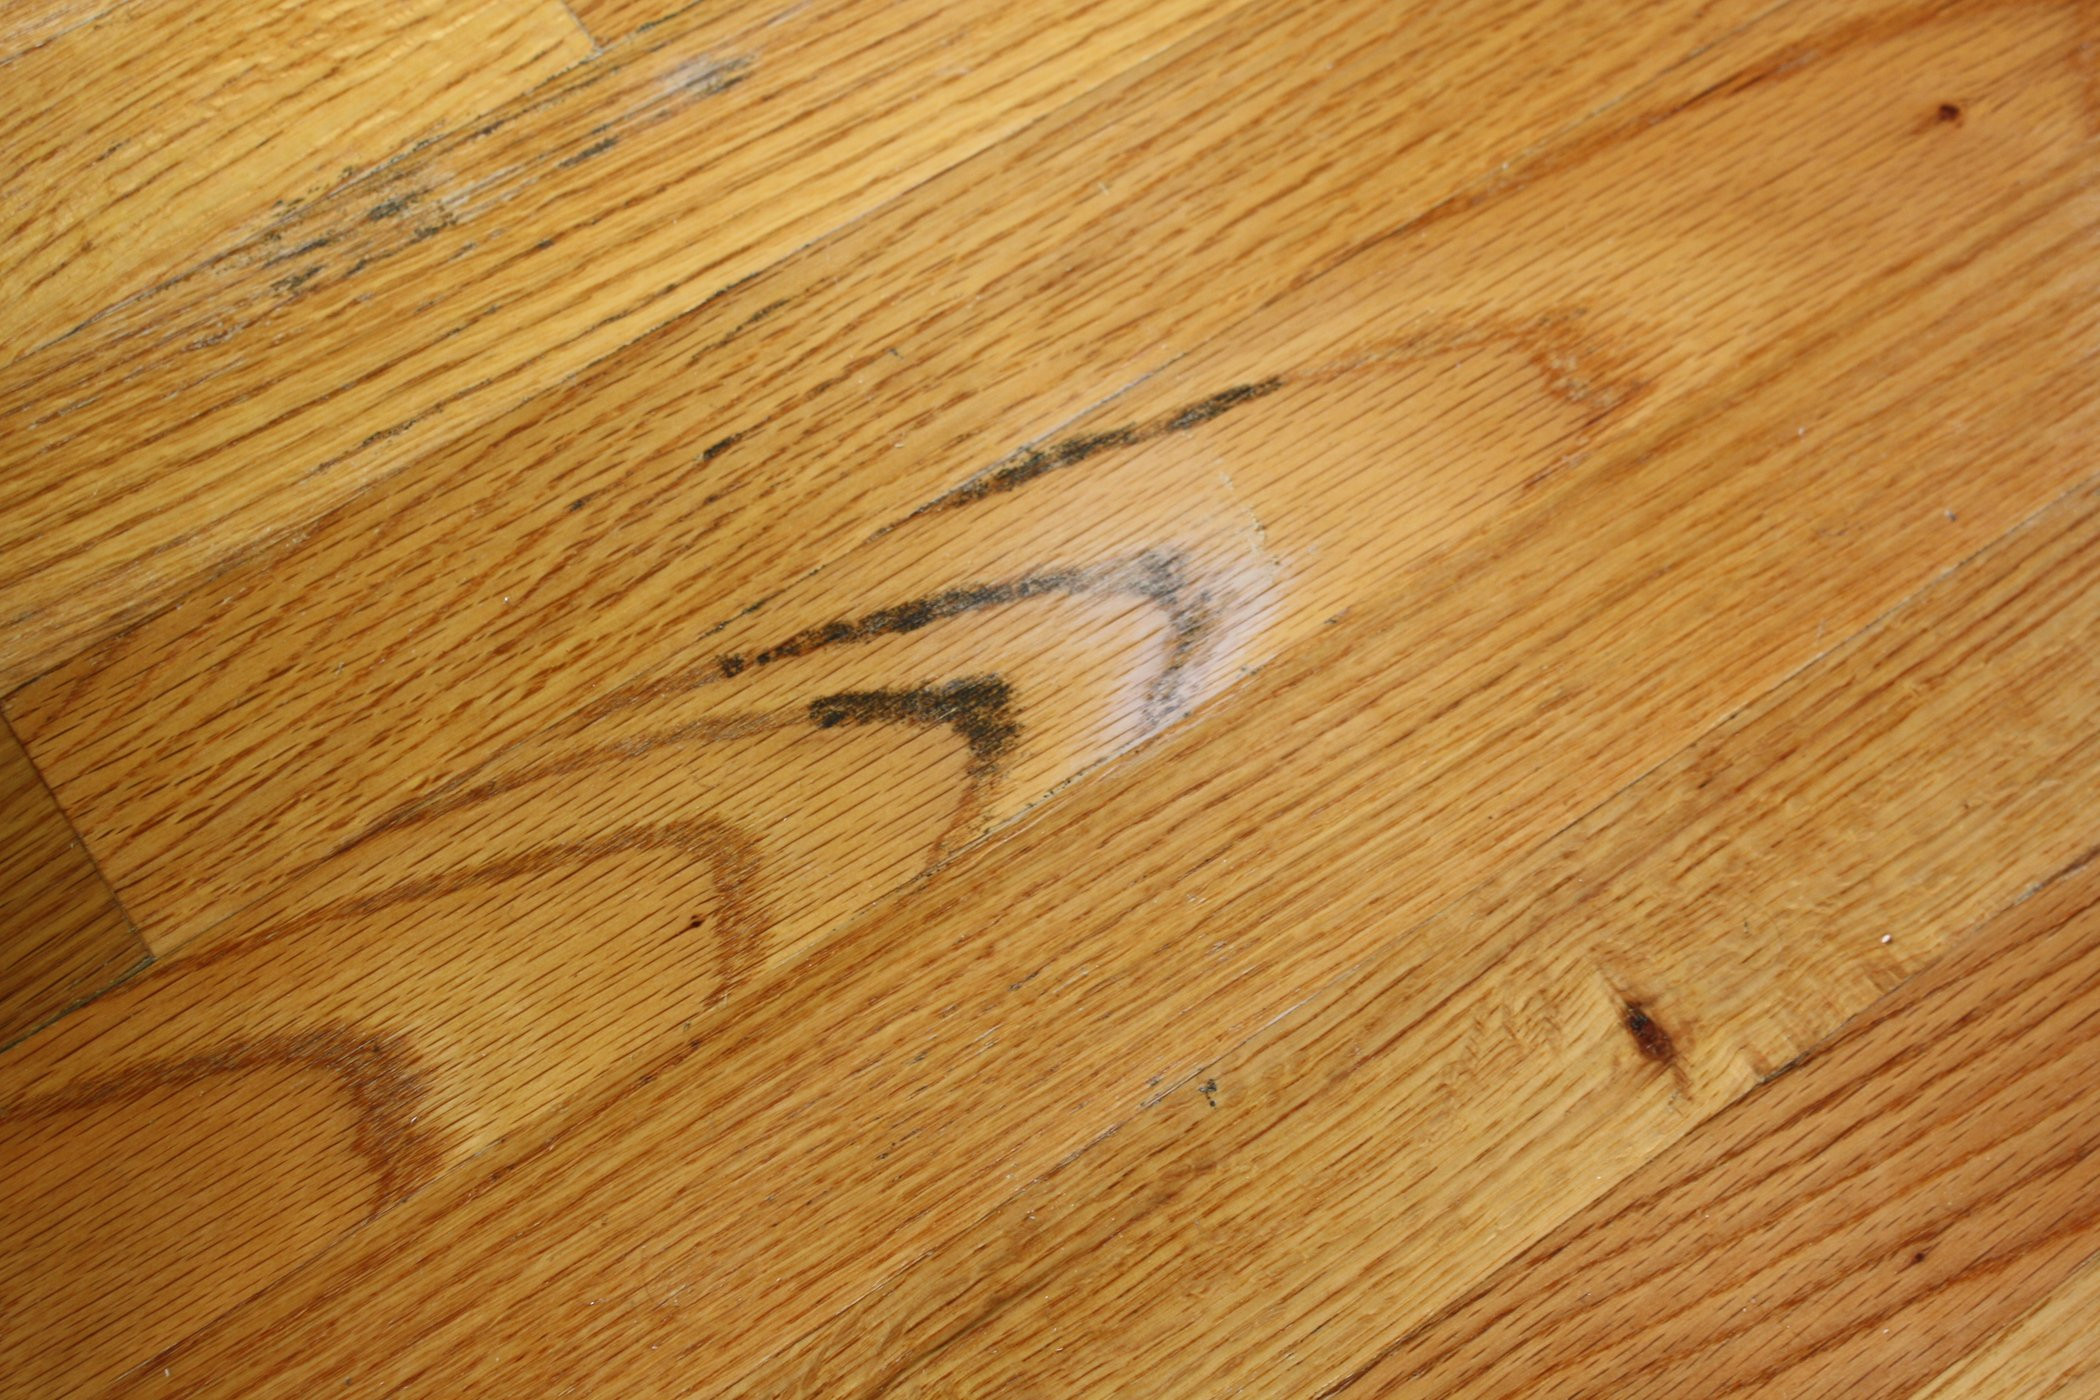 hardwood floor refinishing twin cities of how to clean mold from a wood floor 4 steps regarding fylcmqyg7dyp6ds